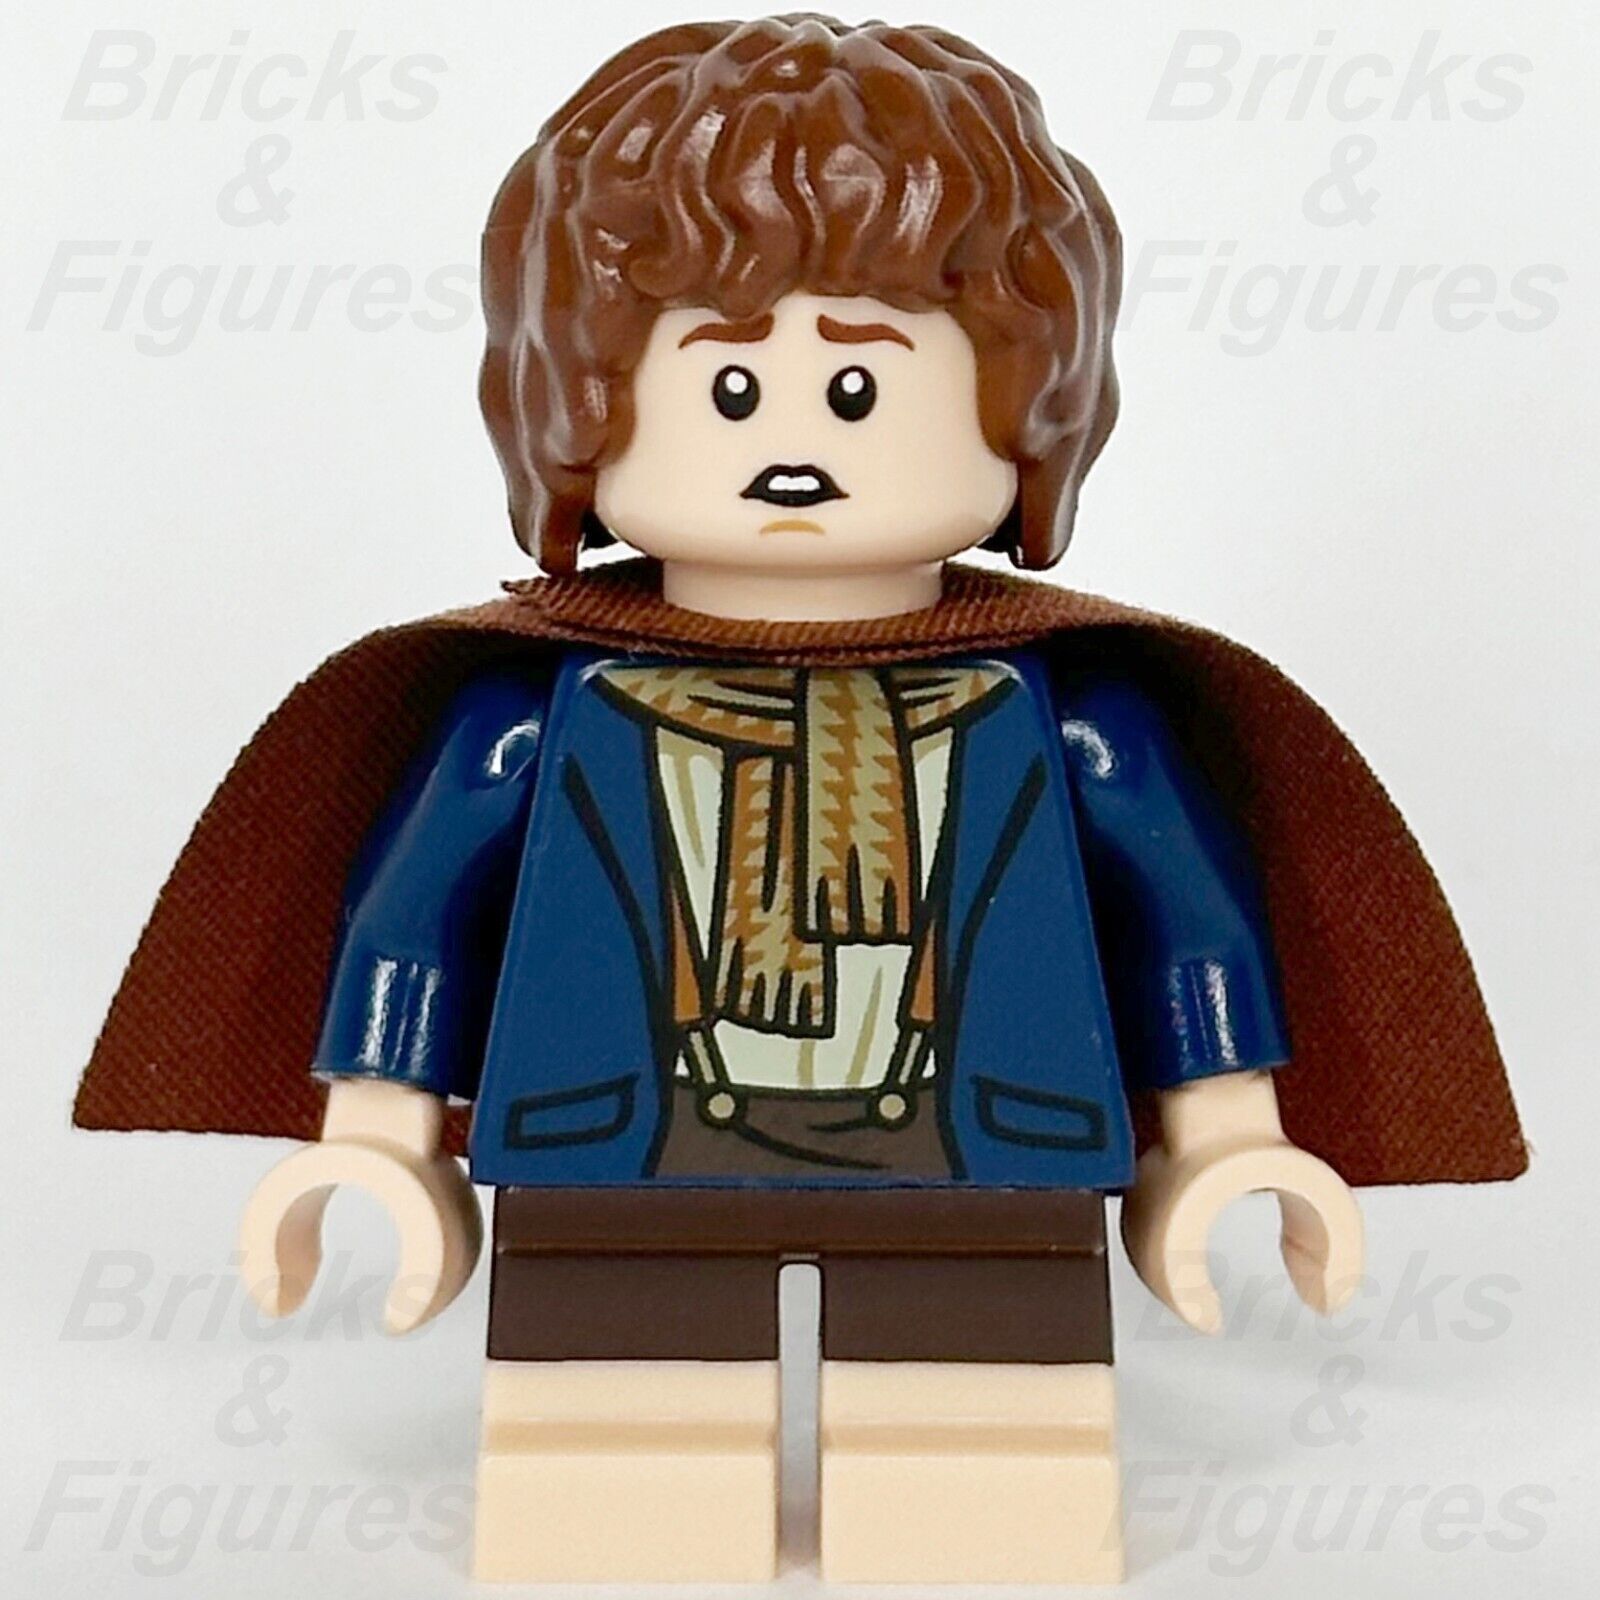 LEGO Pippin Minifigure Hobbit The Lord of the Rings Peregrin Took 10316 lor123